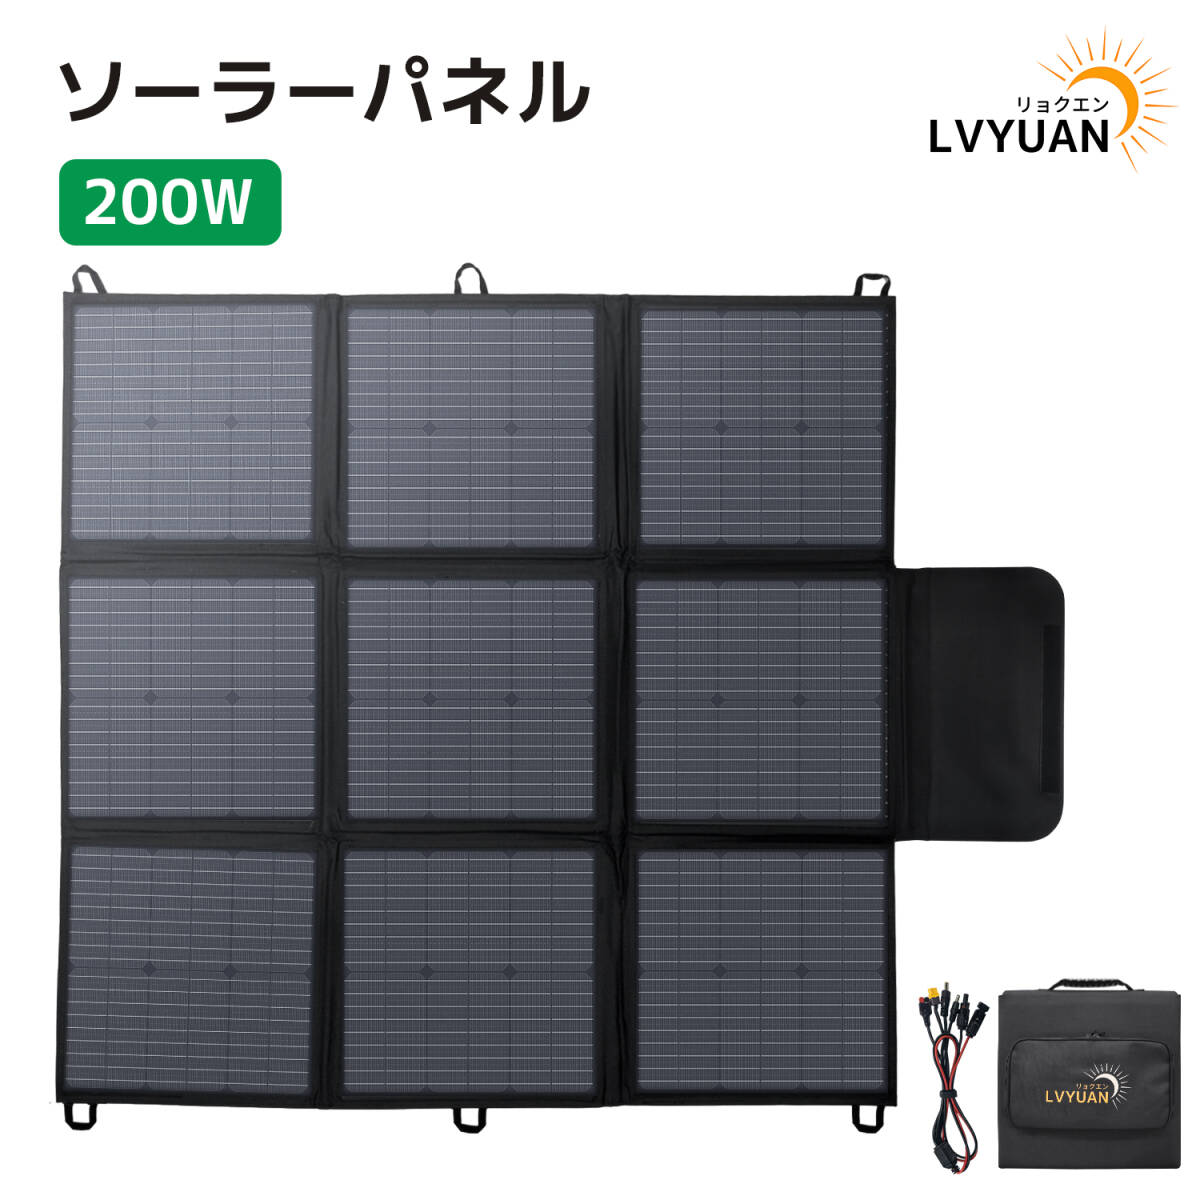  new goods solar panel 200W folding type solar charger conversion efficiency 22% average row connection possibility sun light panel camp disaster prevention for emergency power supply LVYUAN